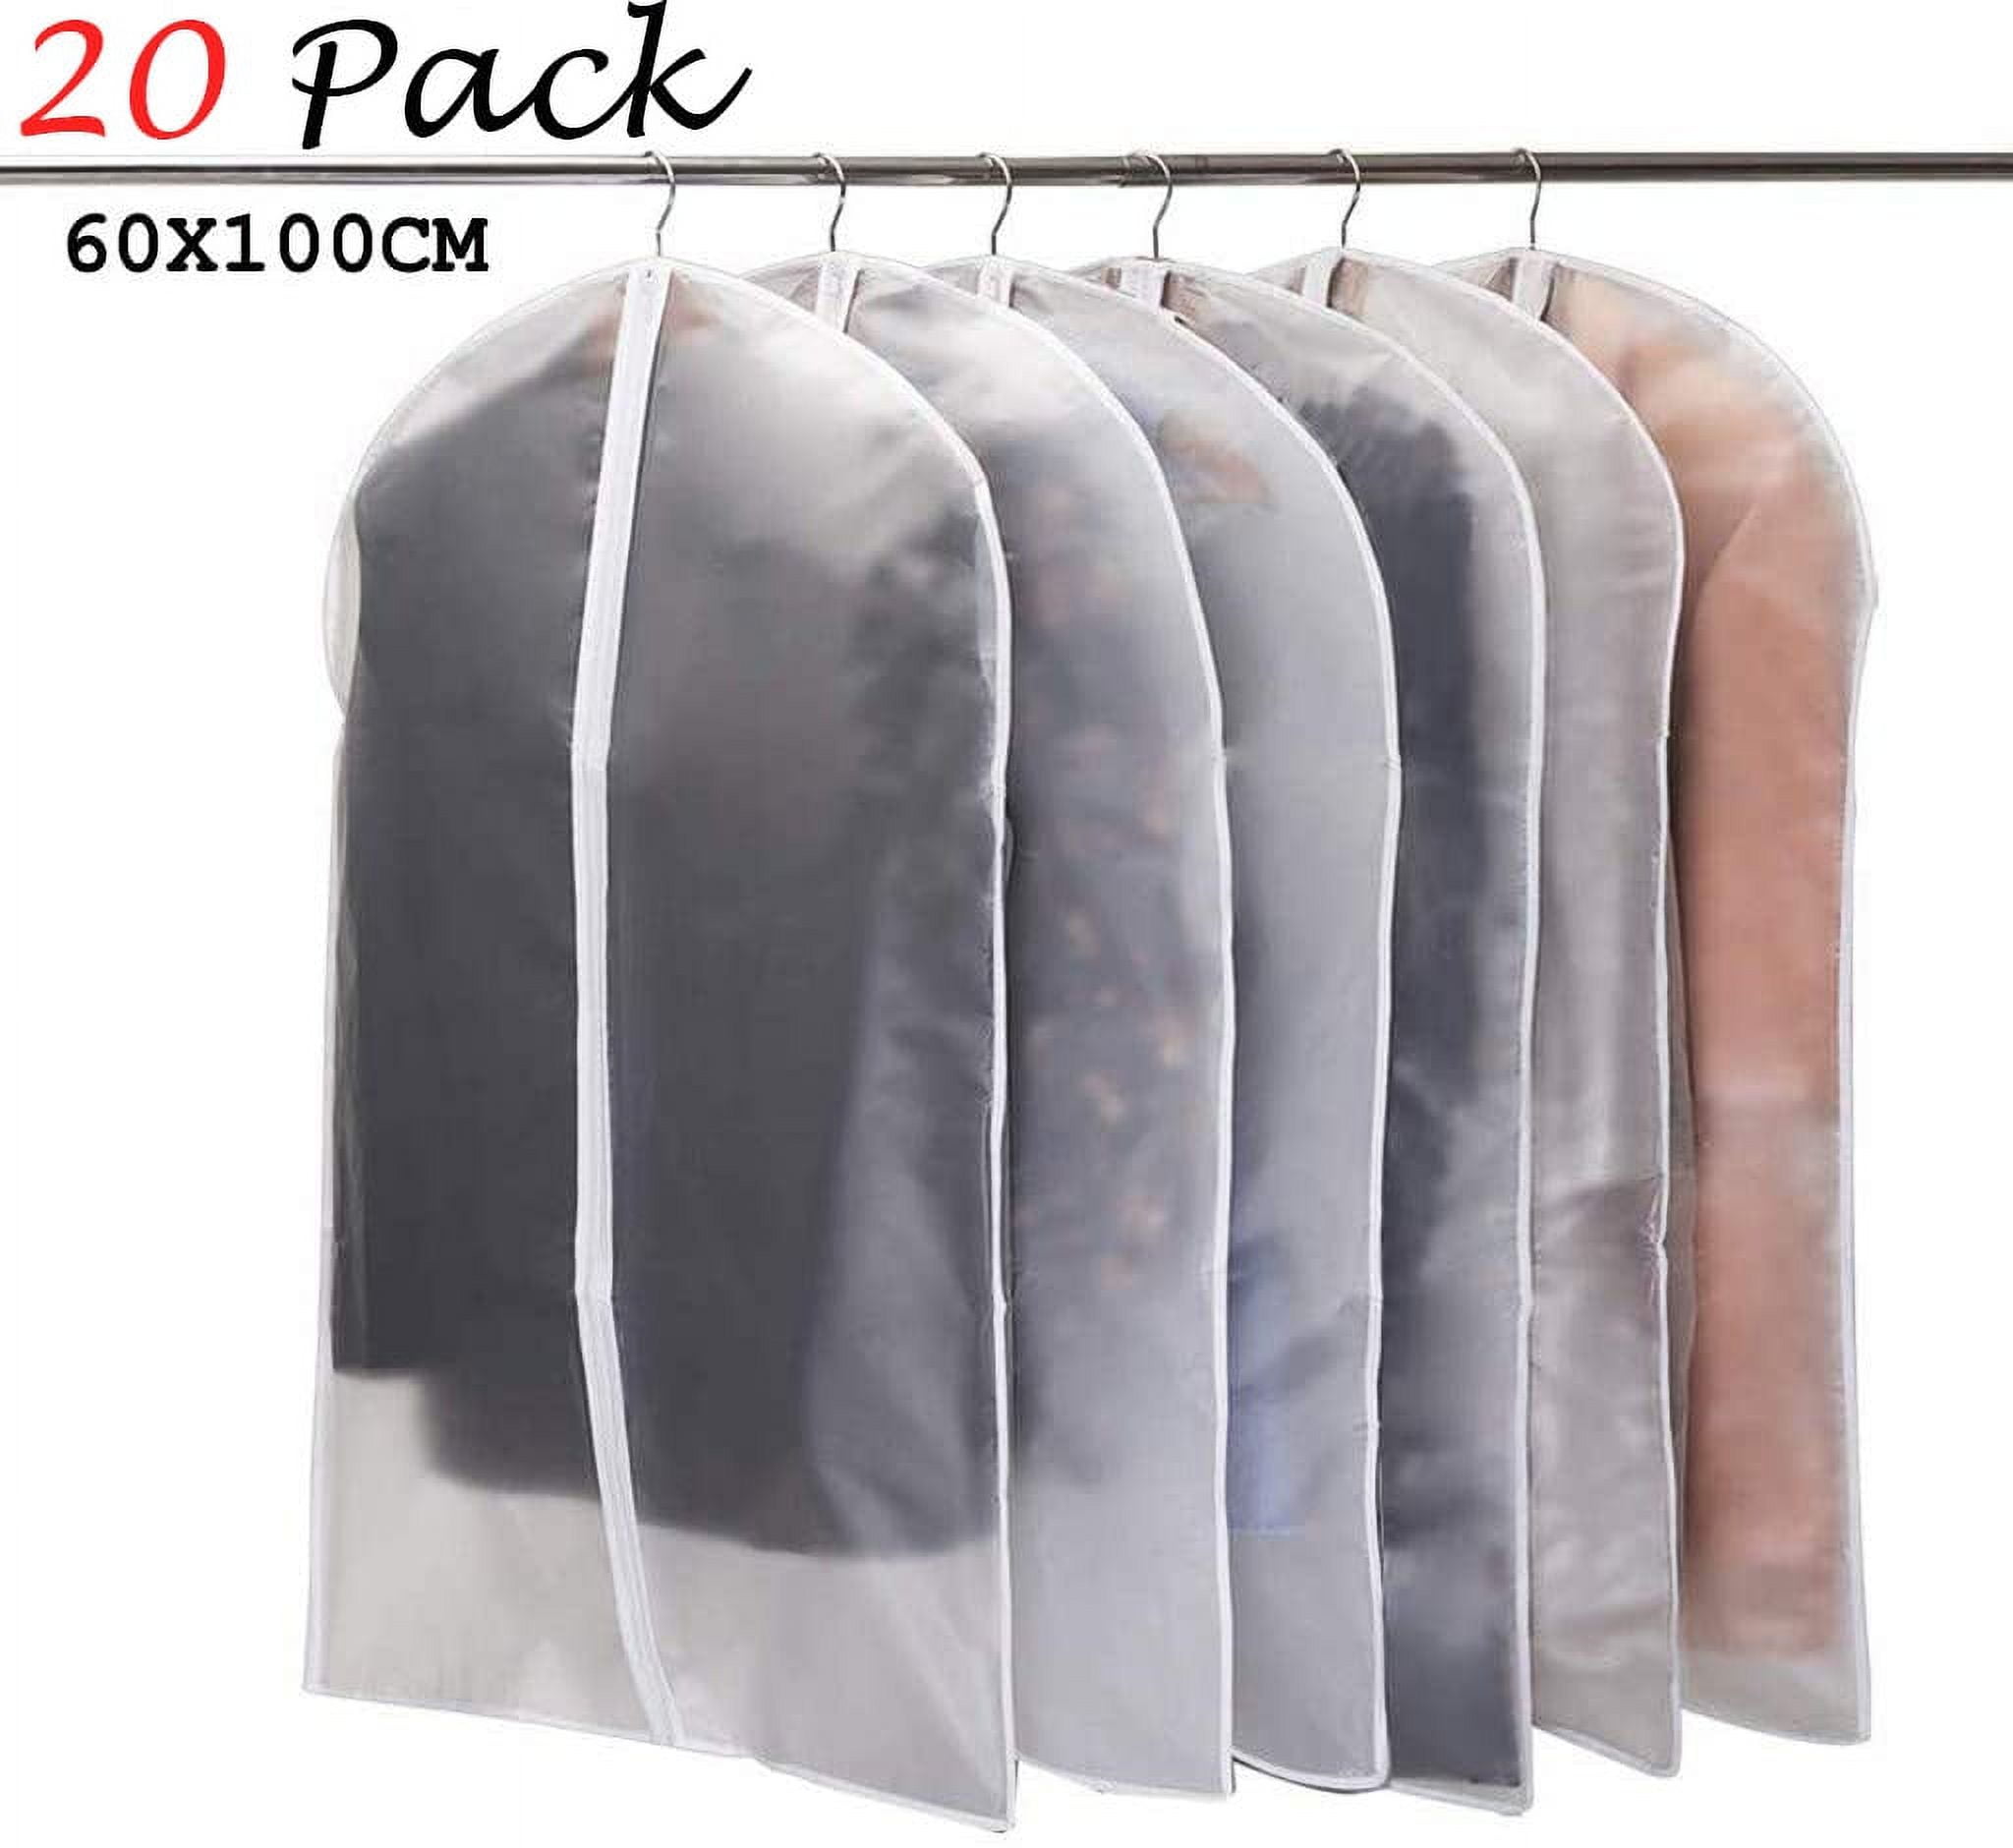 Mskitchen Plastic Garment Clothing Storage Bags, Hanging For Closet  Storage, Cloth Bags With Zipper For Suit, Dress, Coat Travel Closet Clear  Garment